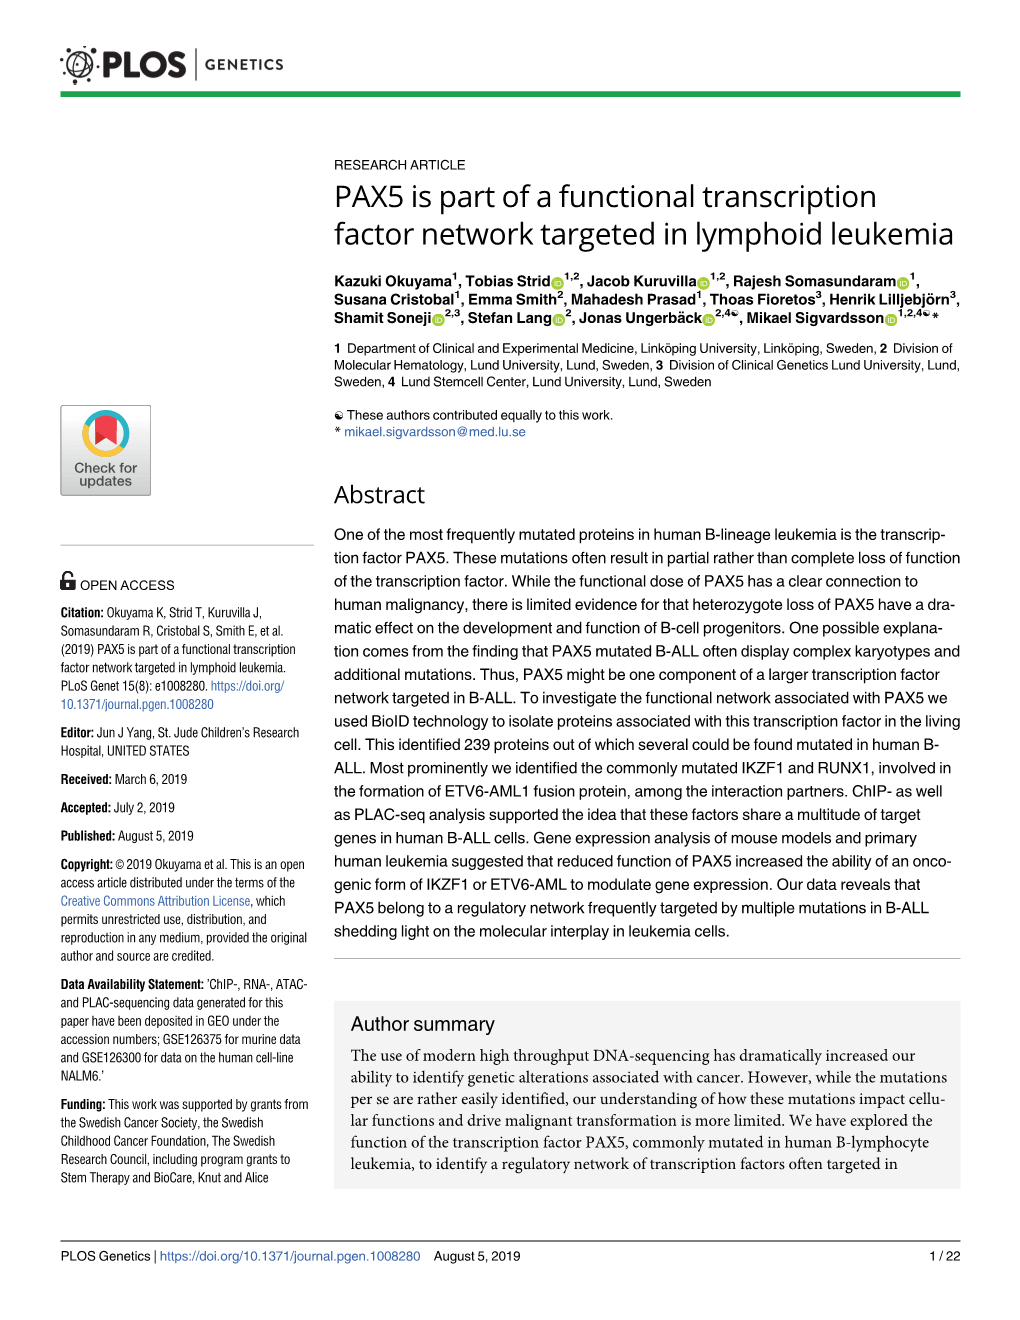 PAX5 Is Part of a Functional Transcription Factor Network Targeted in Lymphoid Leukemia